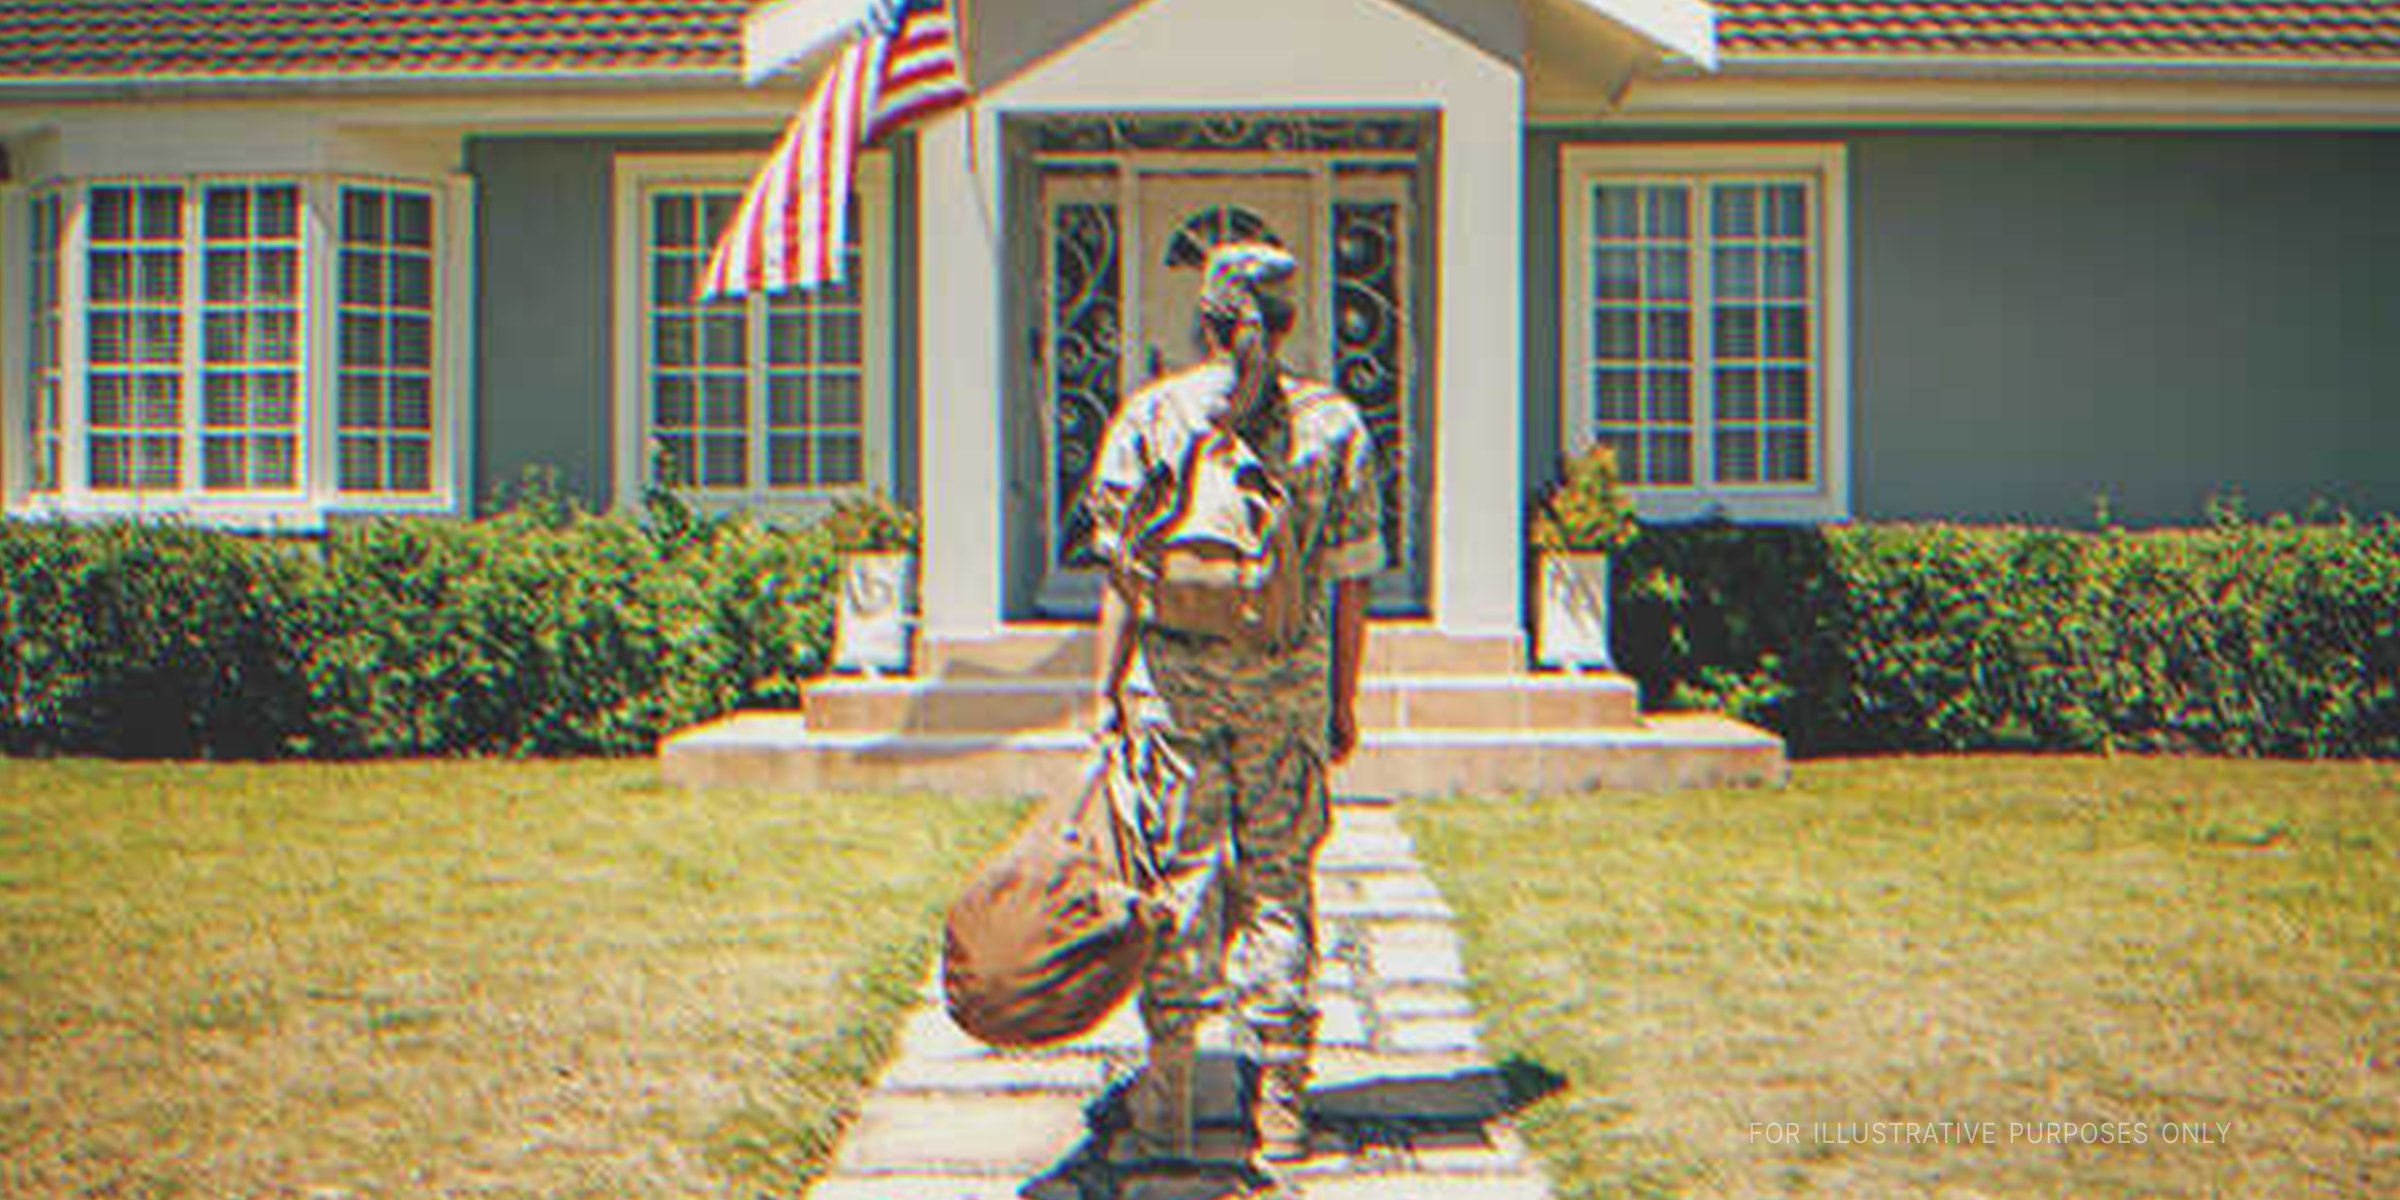 A female soldier outside a house | Source: Shutterstock